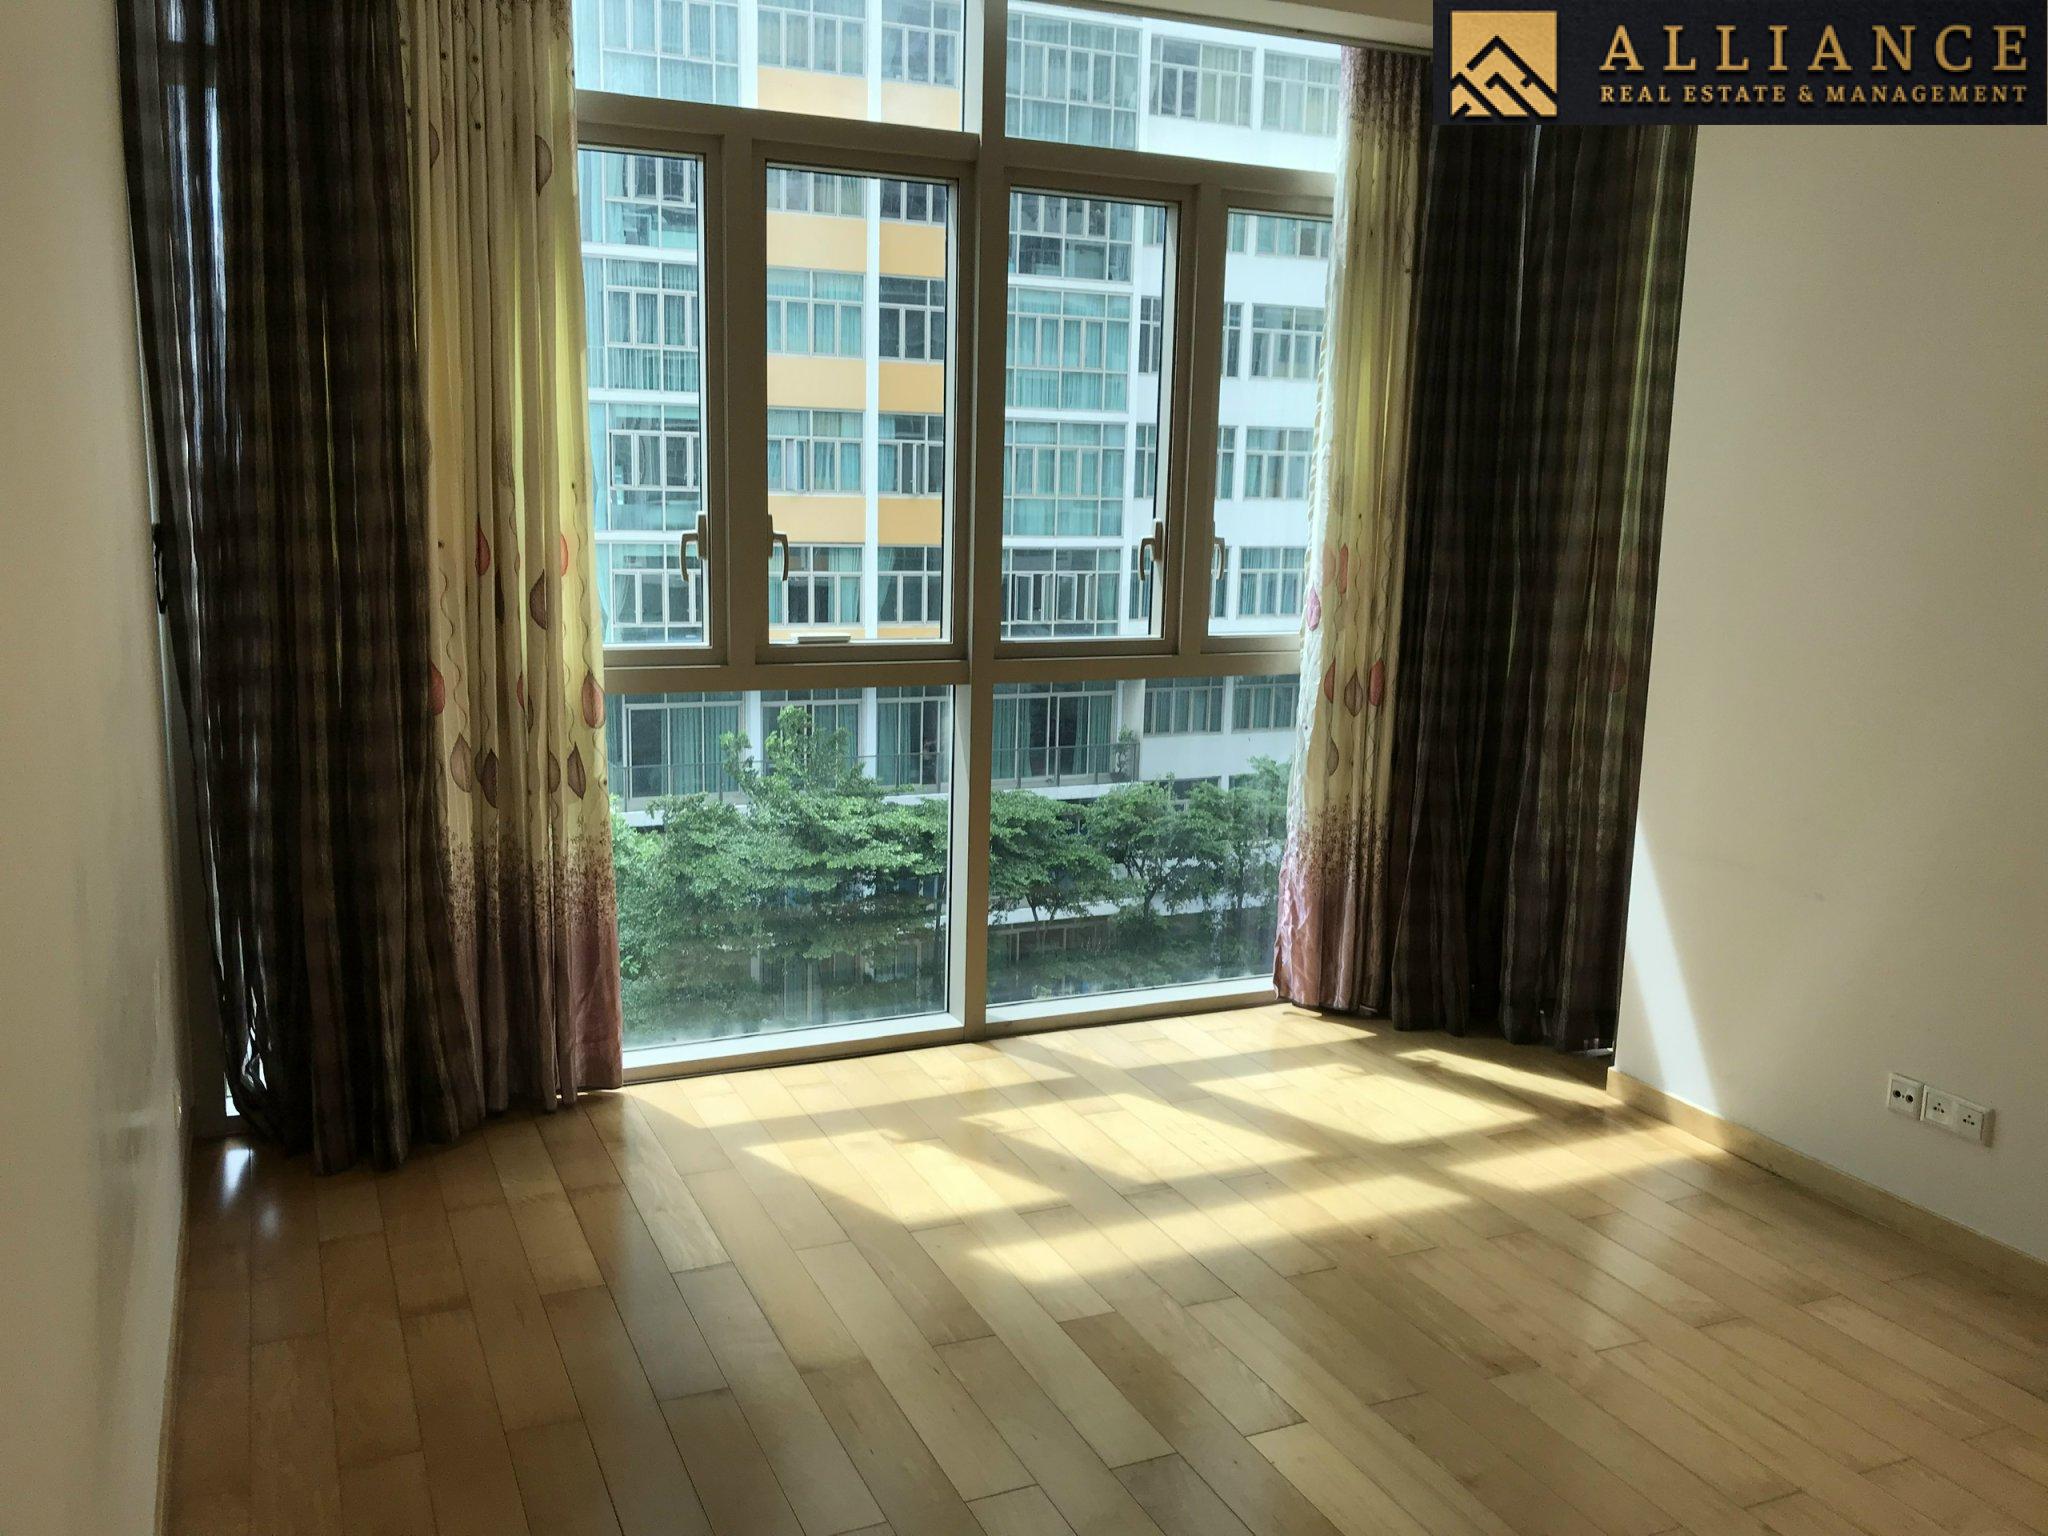 3 Bedroom Apartment (The Vista) for sale in An Phu Ward, Thu Duc City, HCM City